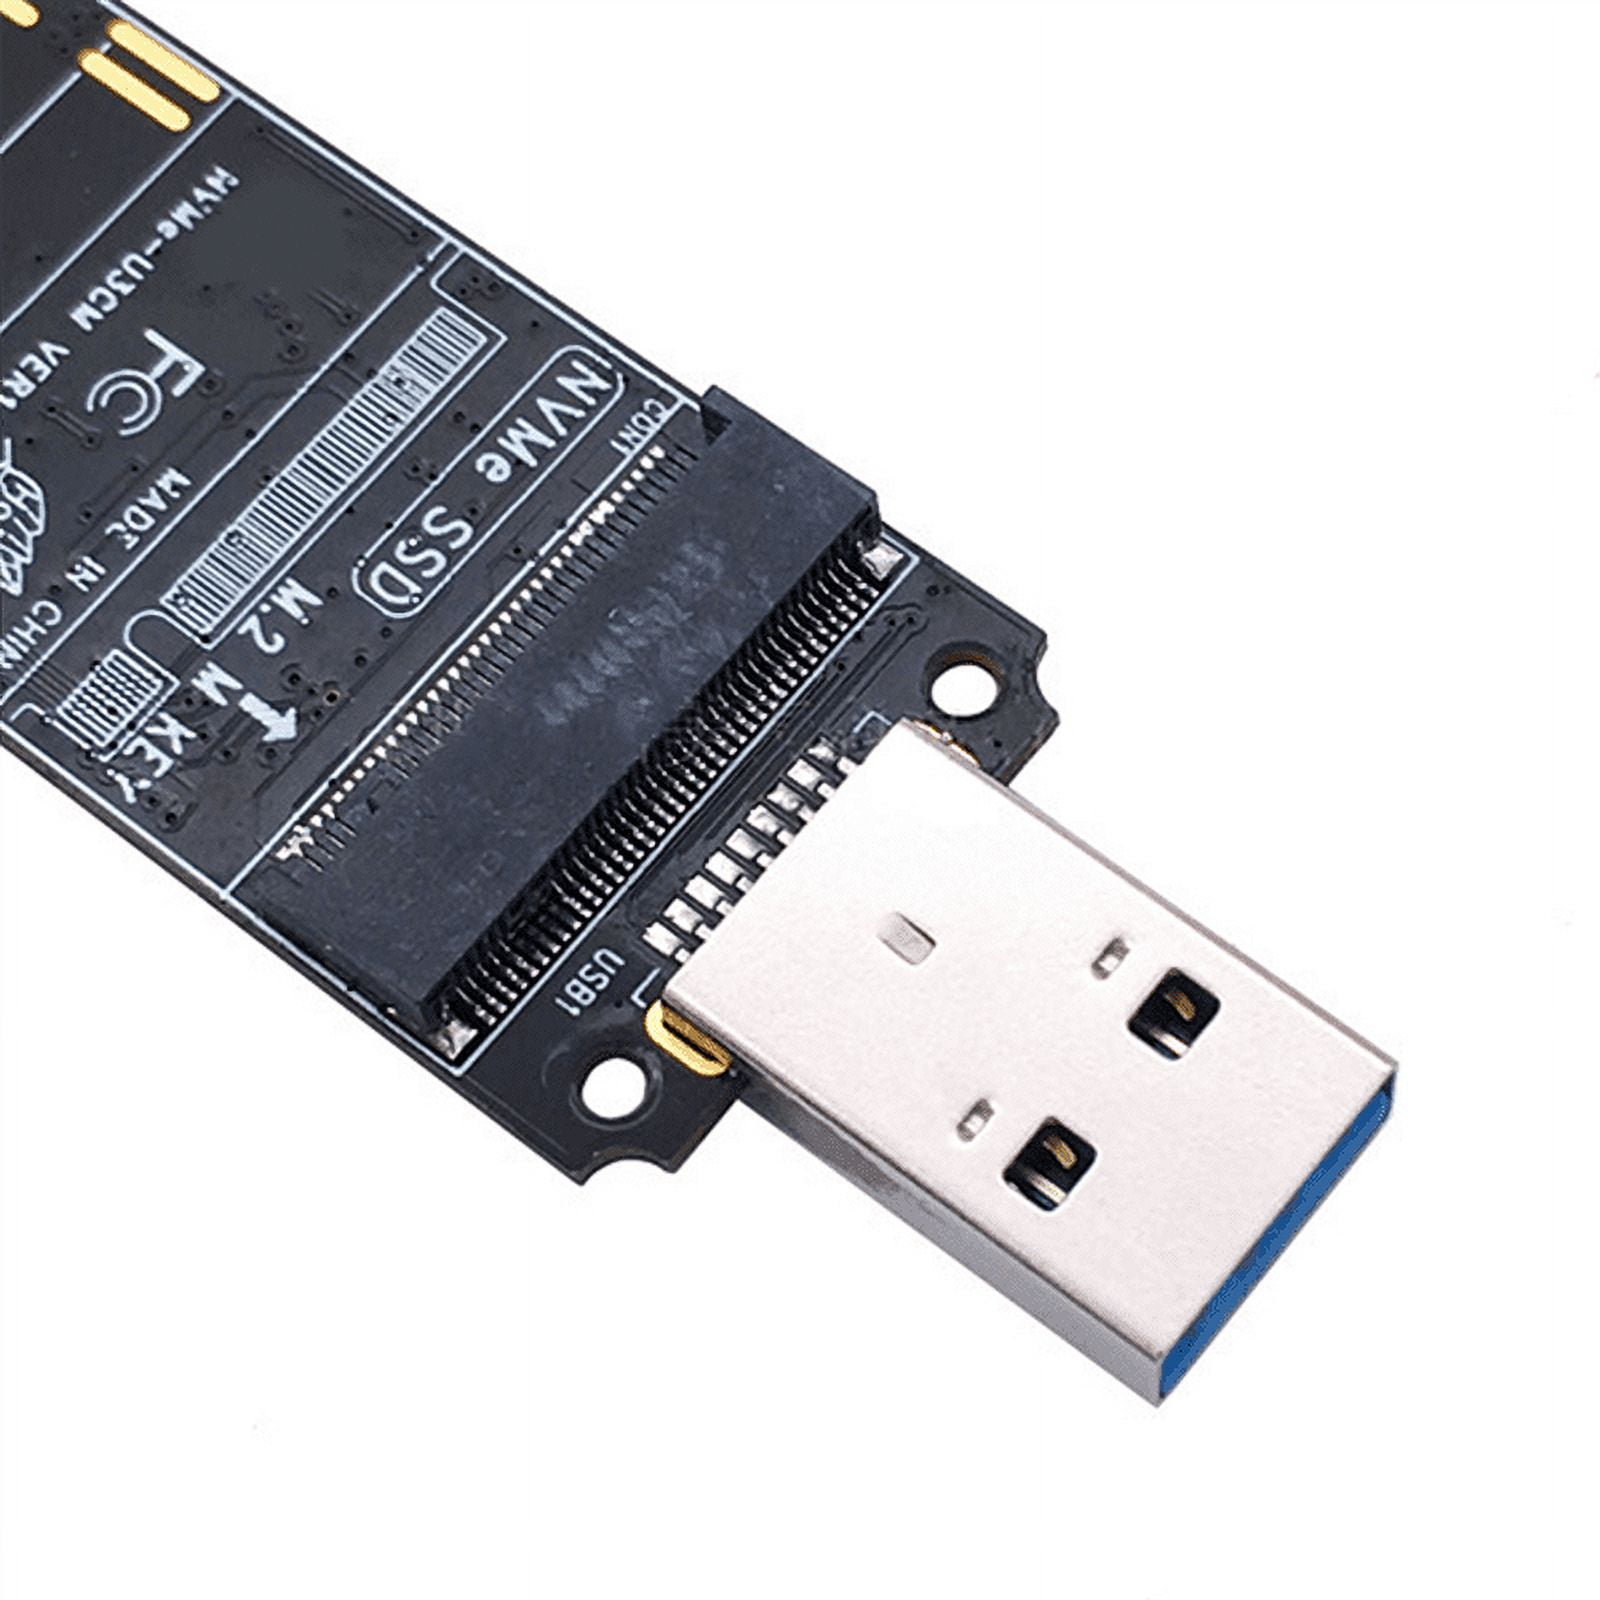 ELUTENG M.2 to USB Adapter M.2 NVME / NGFF Hard Drive USB3.1 Gen2 10Gbps  USB to NVME PCI-E Converter Reader M Key & B+M Key Support UASP for 2280  2260